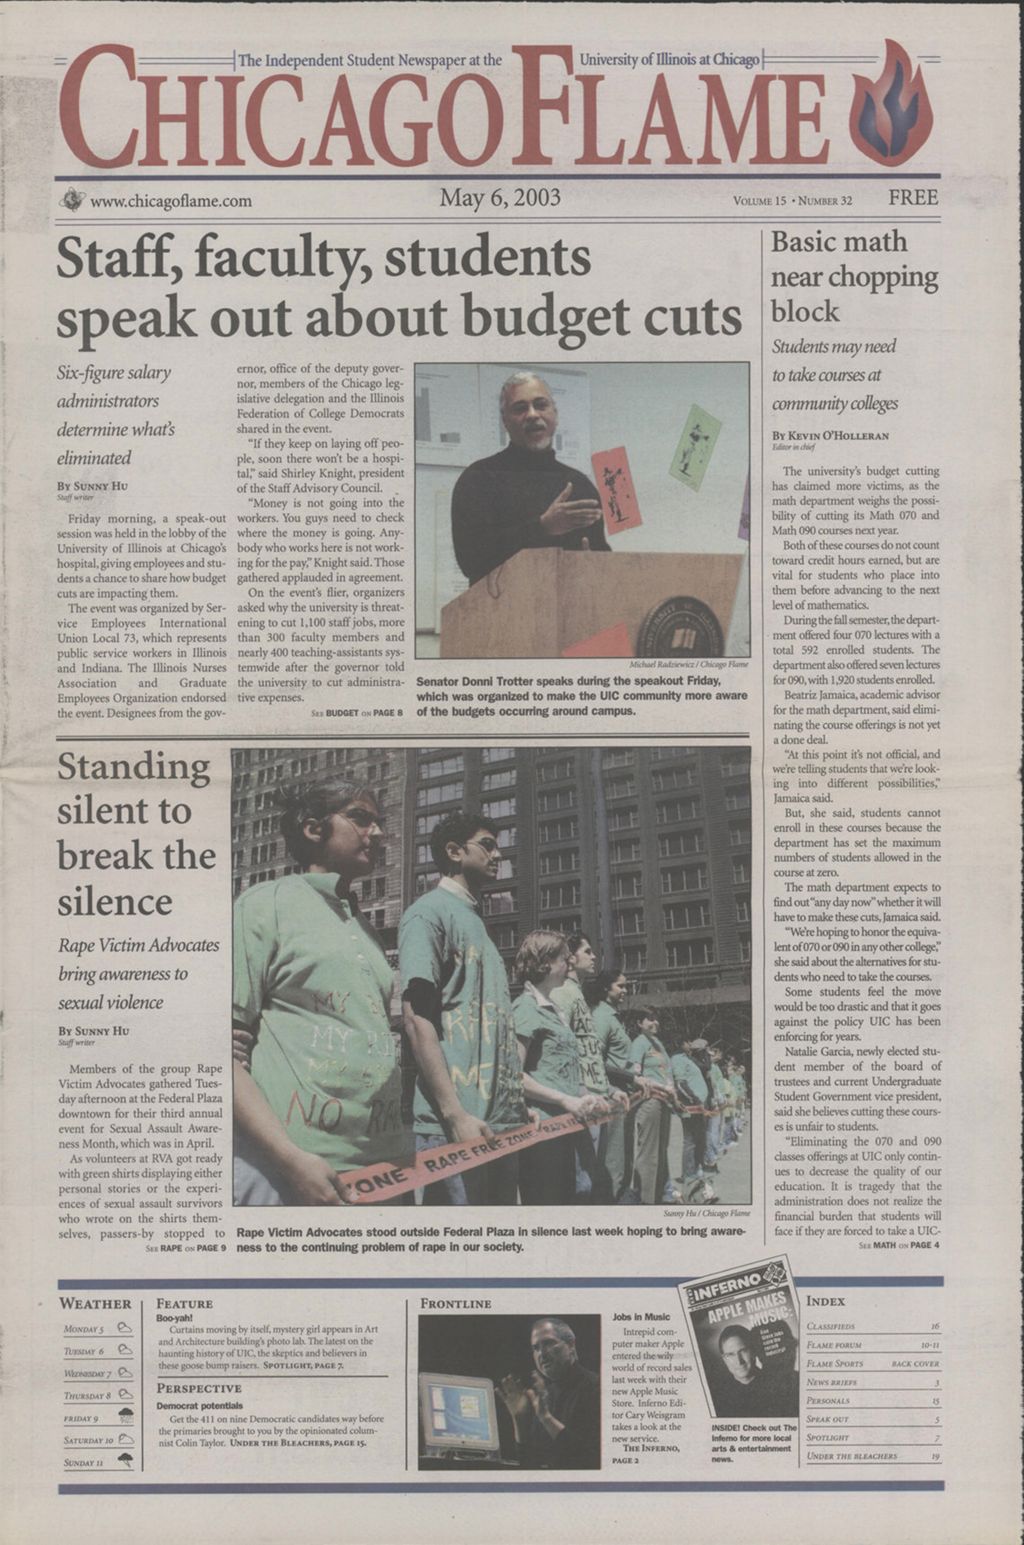 Chicago Flame (May 6, 2003)